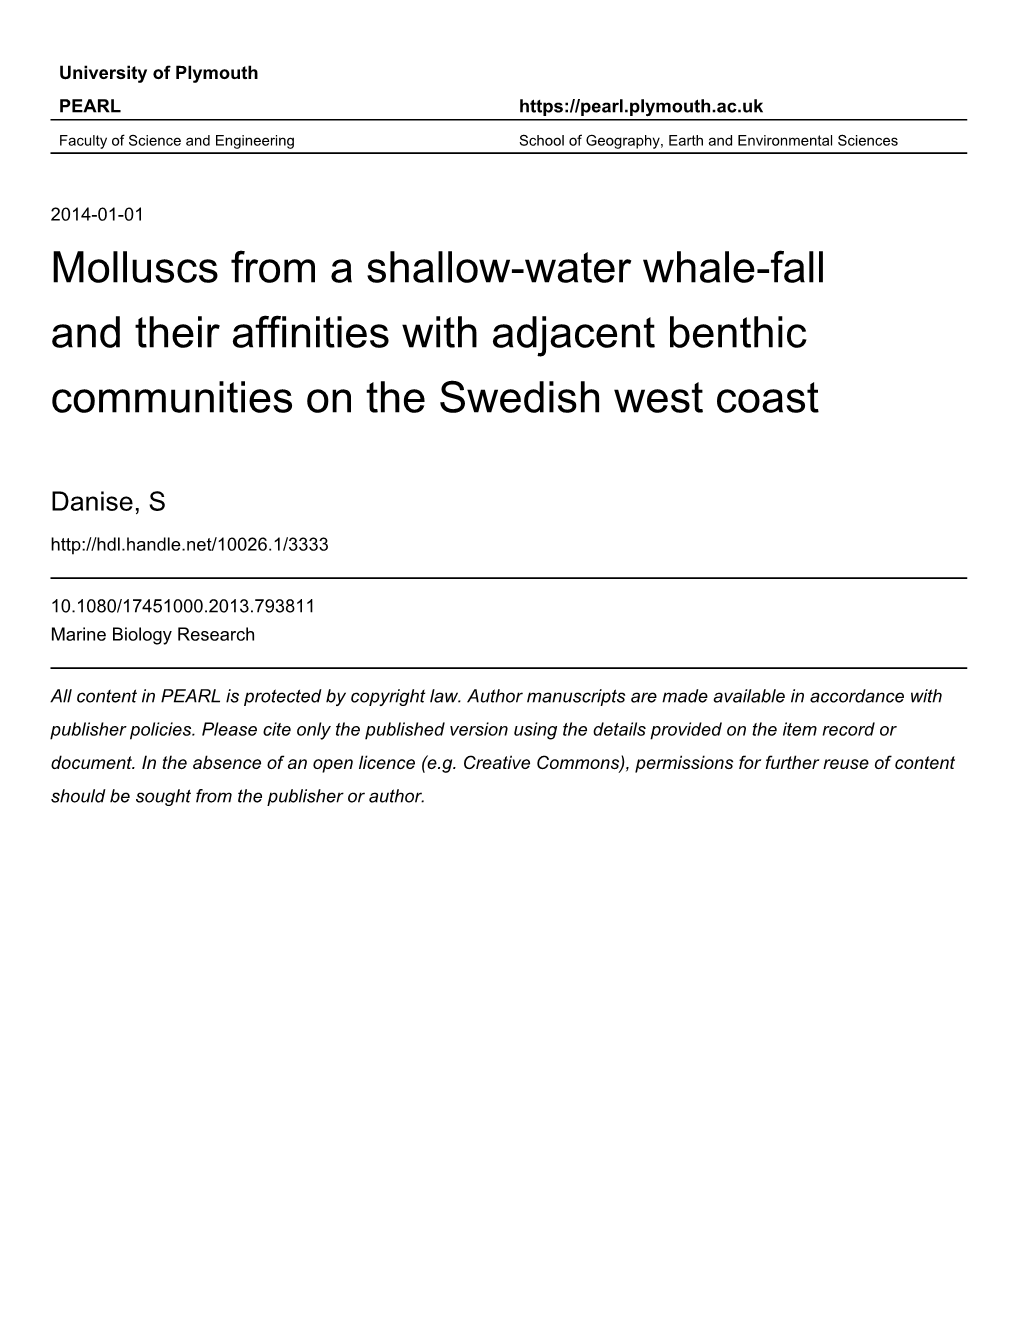 Molluscs from a Shallow-Water Whale-Fall in the North Atlantic 1 Danise Silvia 1, 2*, Stefano Dominici 3, Thomas G. Dahlgren 4